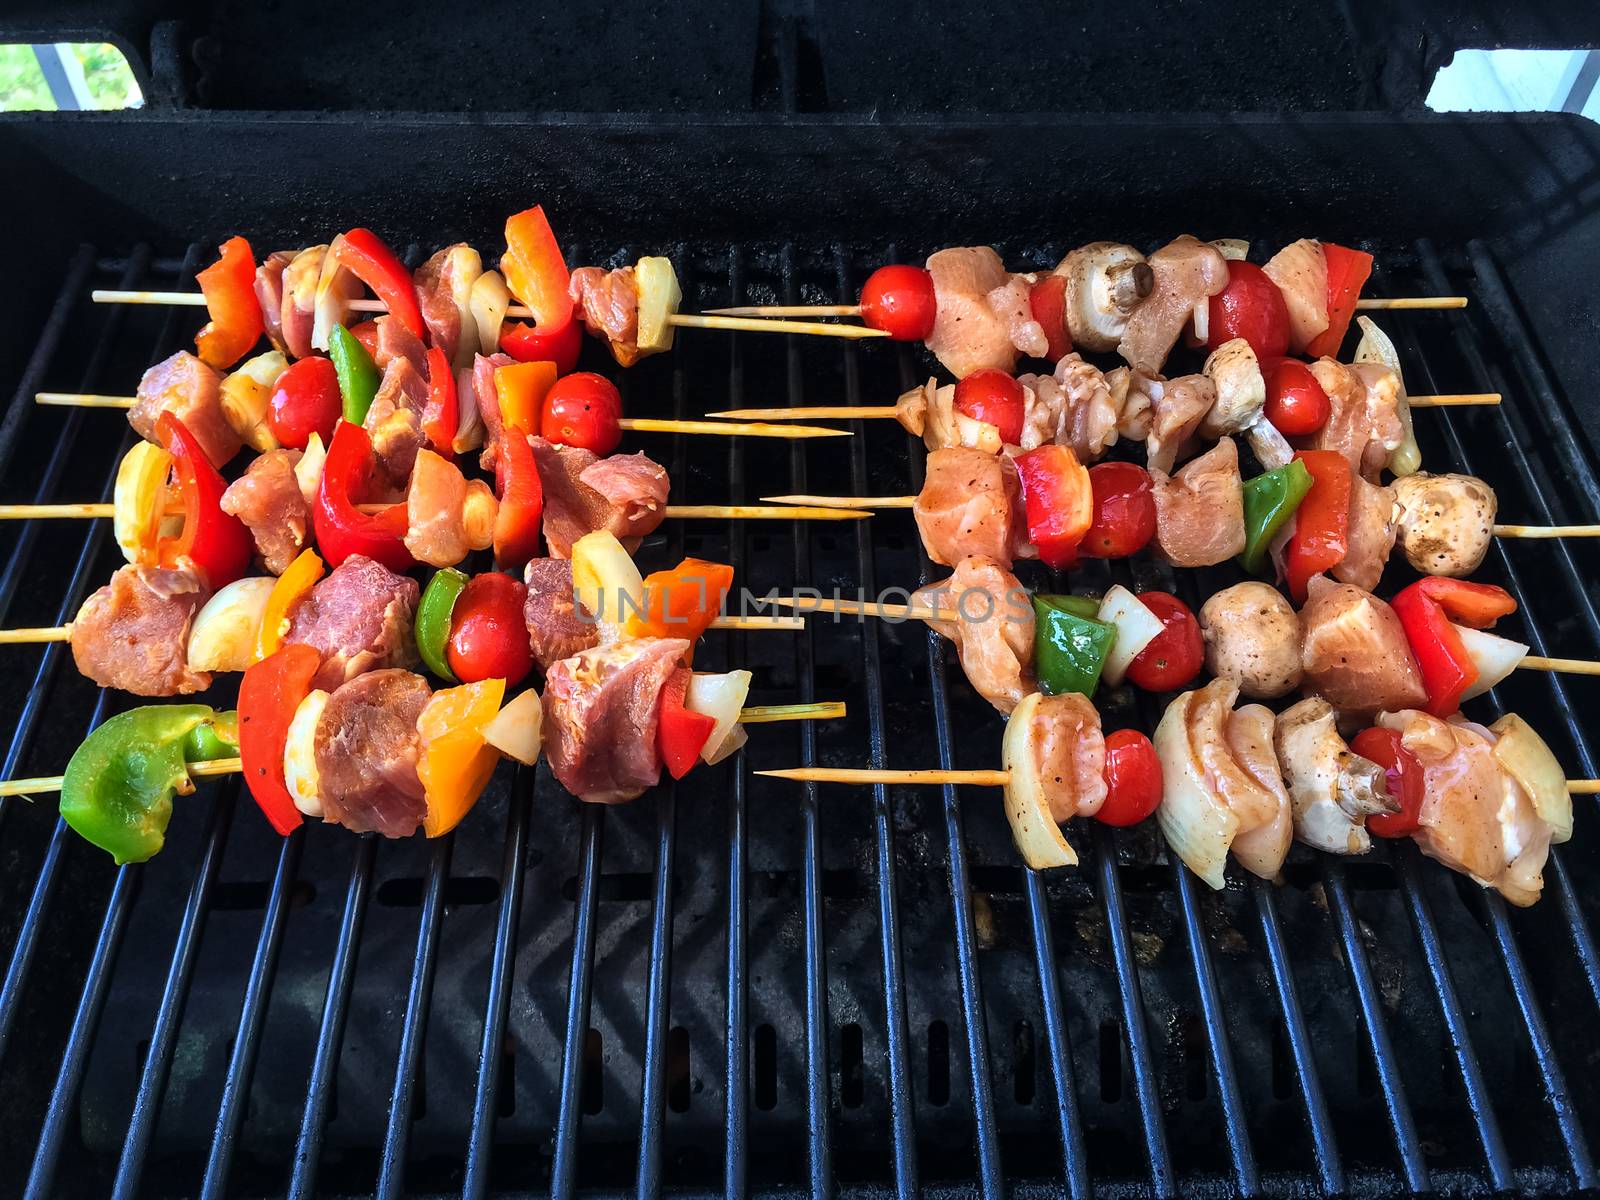 Outdoor grill with meat and vegetable skewers, ready to barbecue.